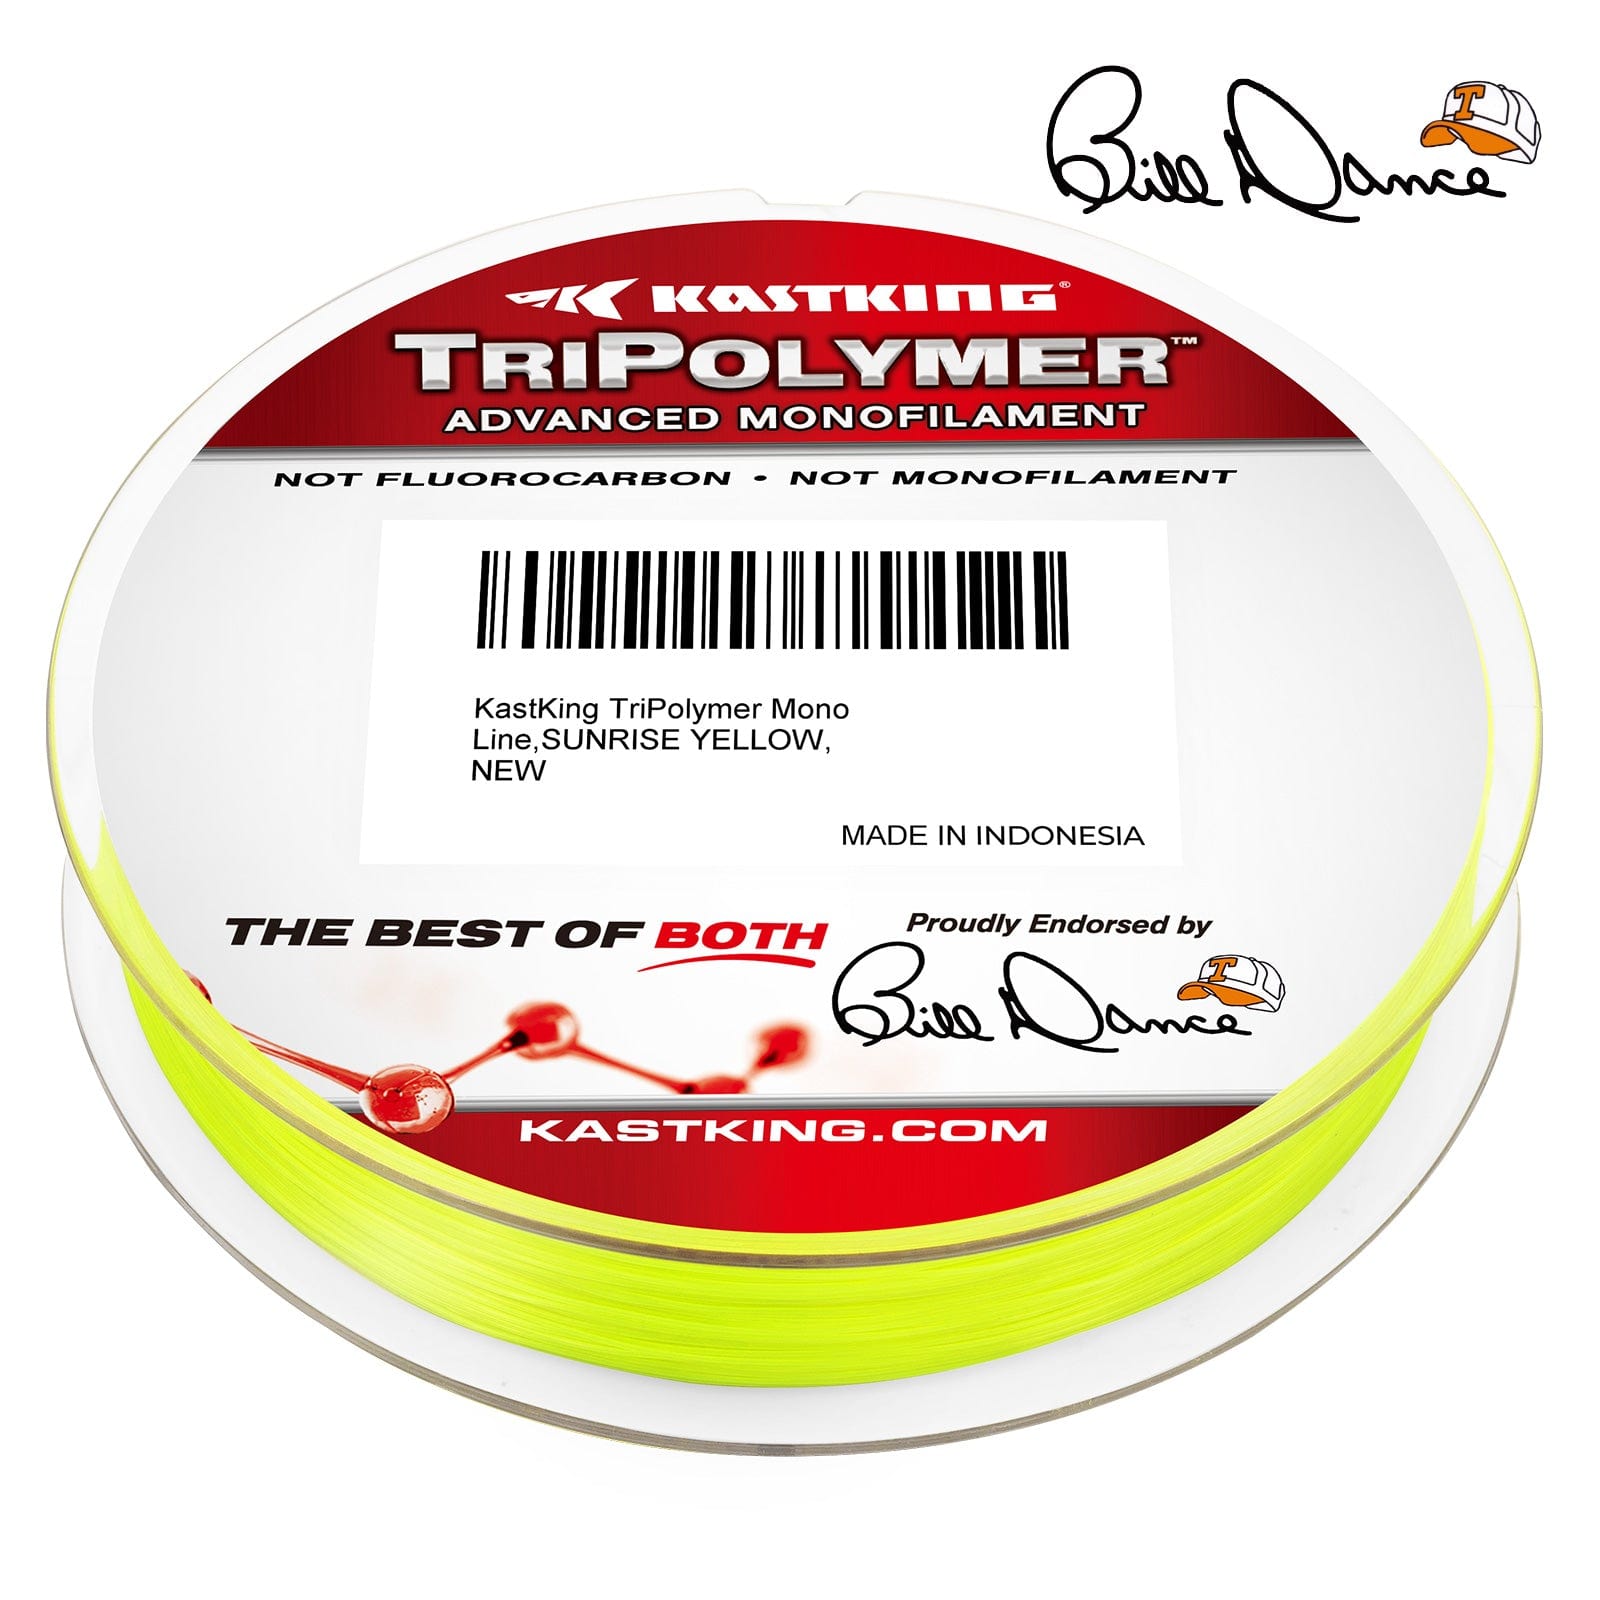 KastKing Tripolymer Advanced Monofilament Sets A New Standard In Fishing  Line - Fishing Tackle Retailer - The Business Magazine of the Sportfishing  Industry